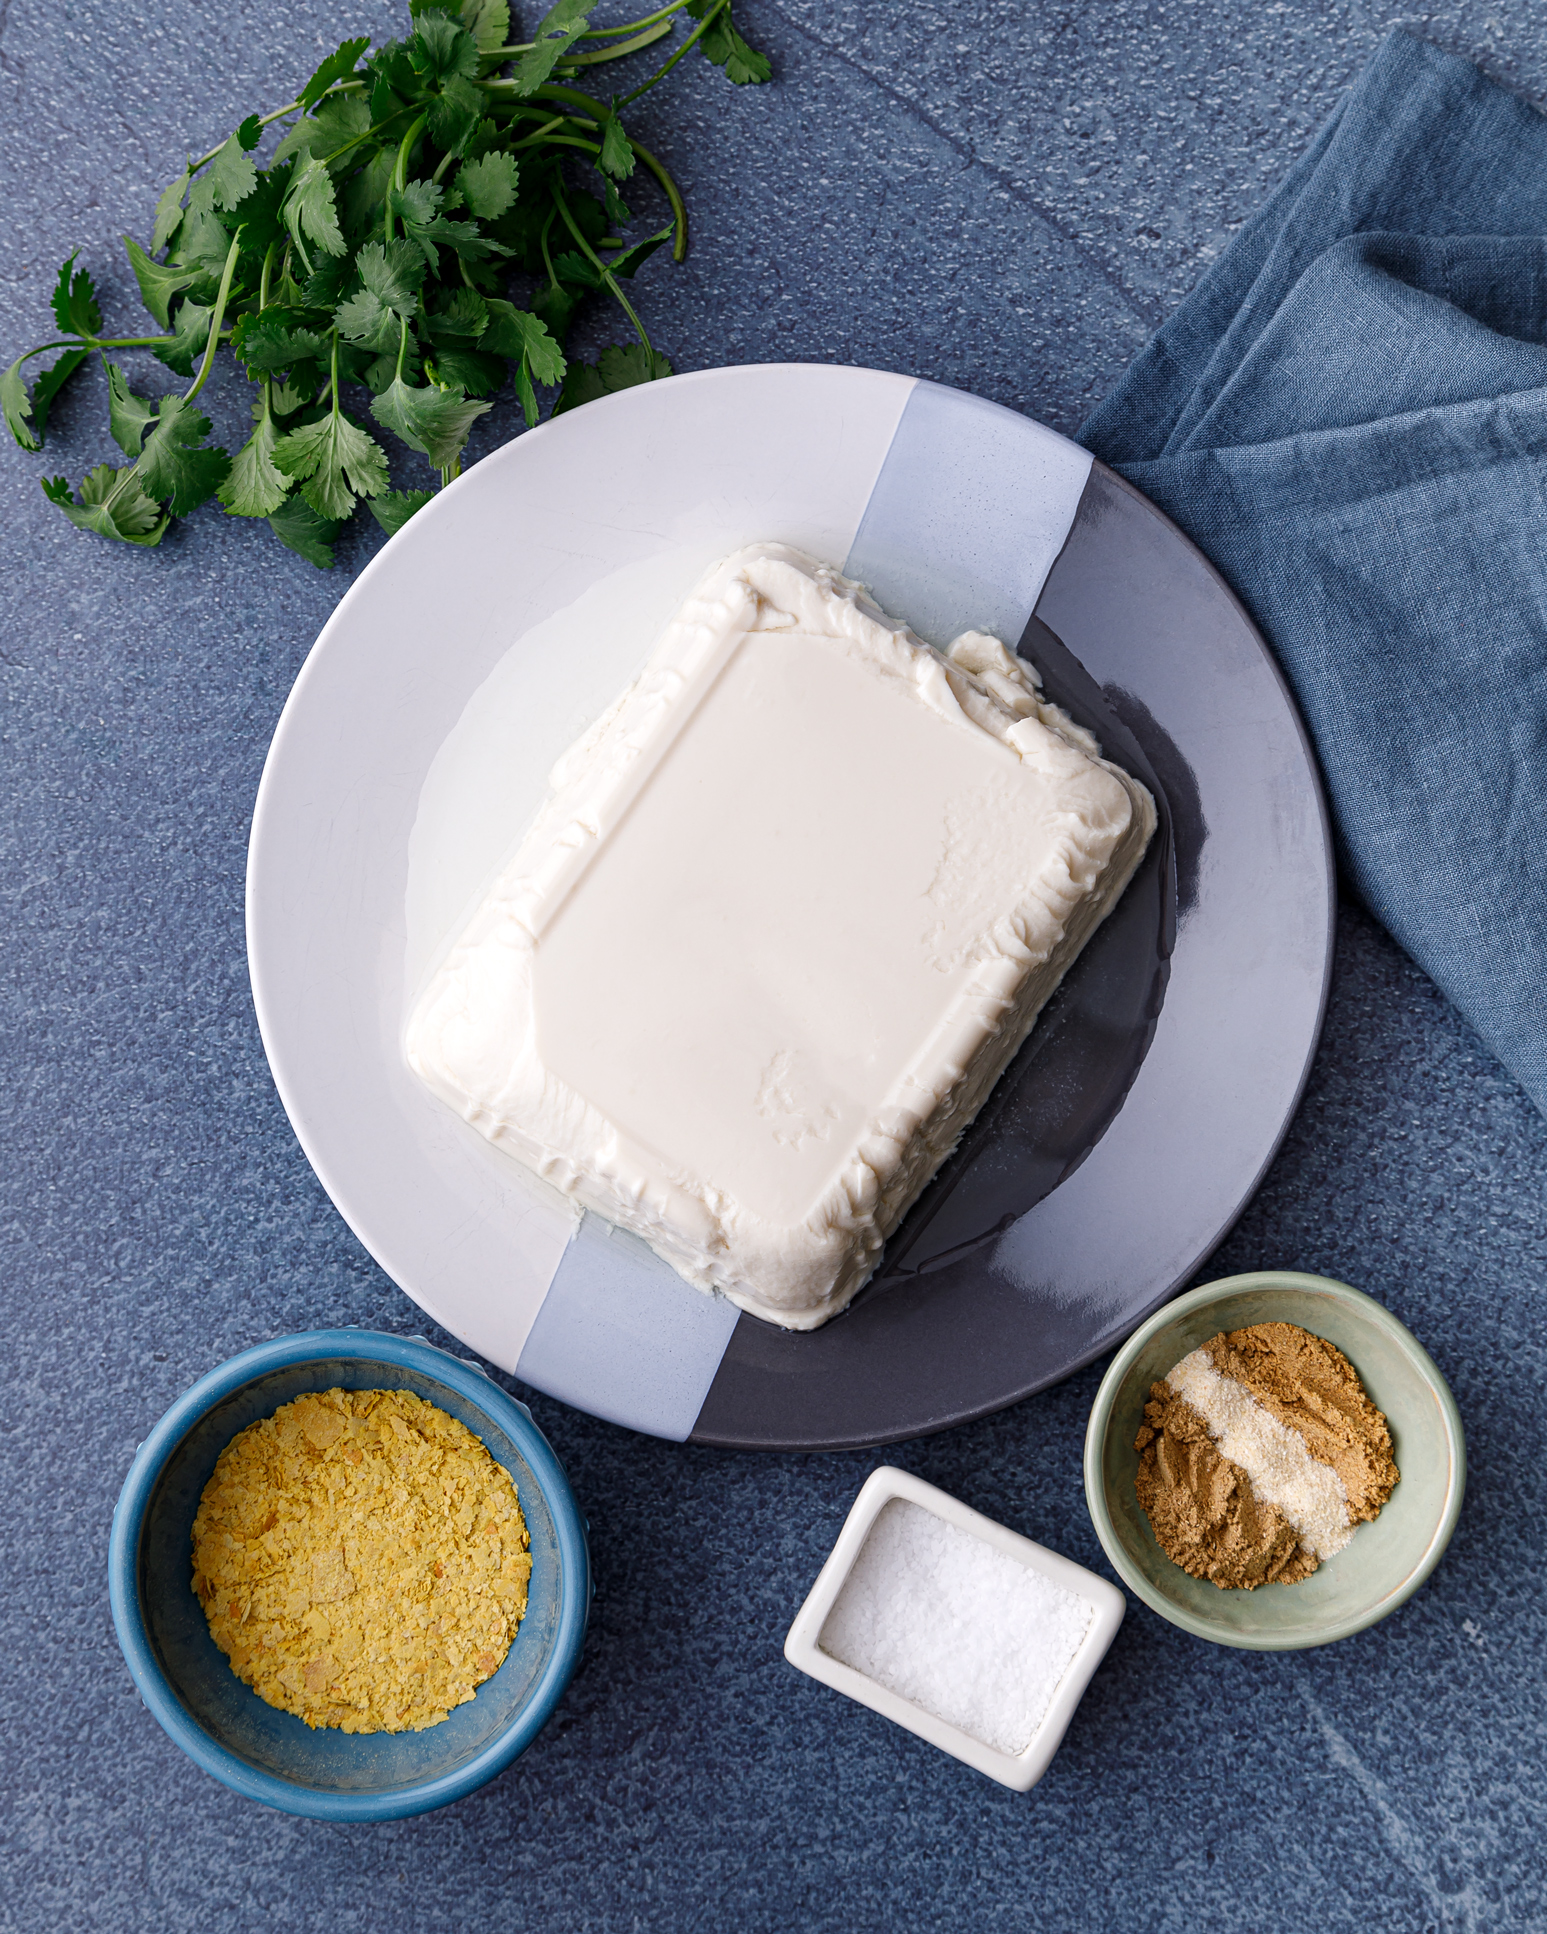 Ingredients for Tofu Queso laid out on a blue background. There is a plate wtih a block of queso, a small bowl of nutrtional yeast, a small container of salt, fresh cilantro and spices